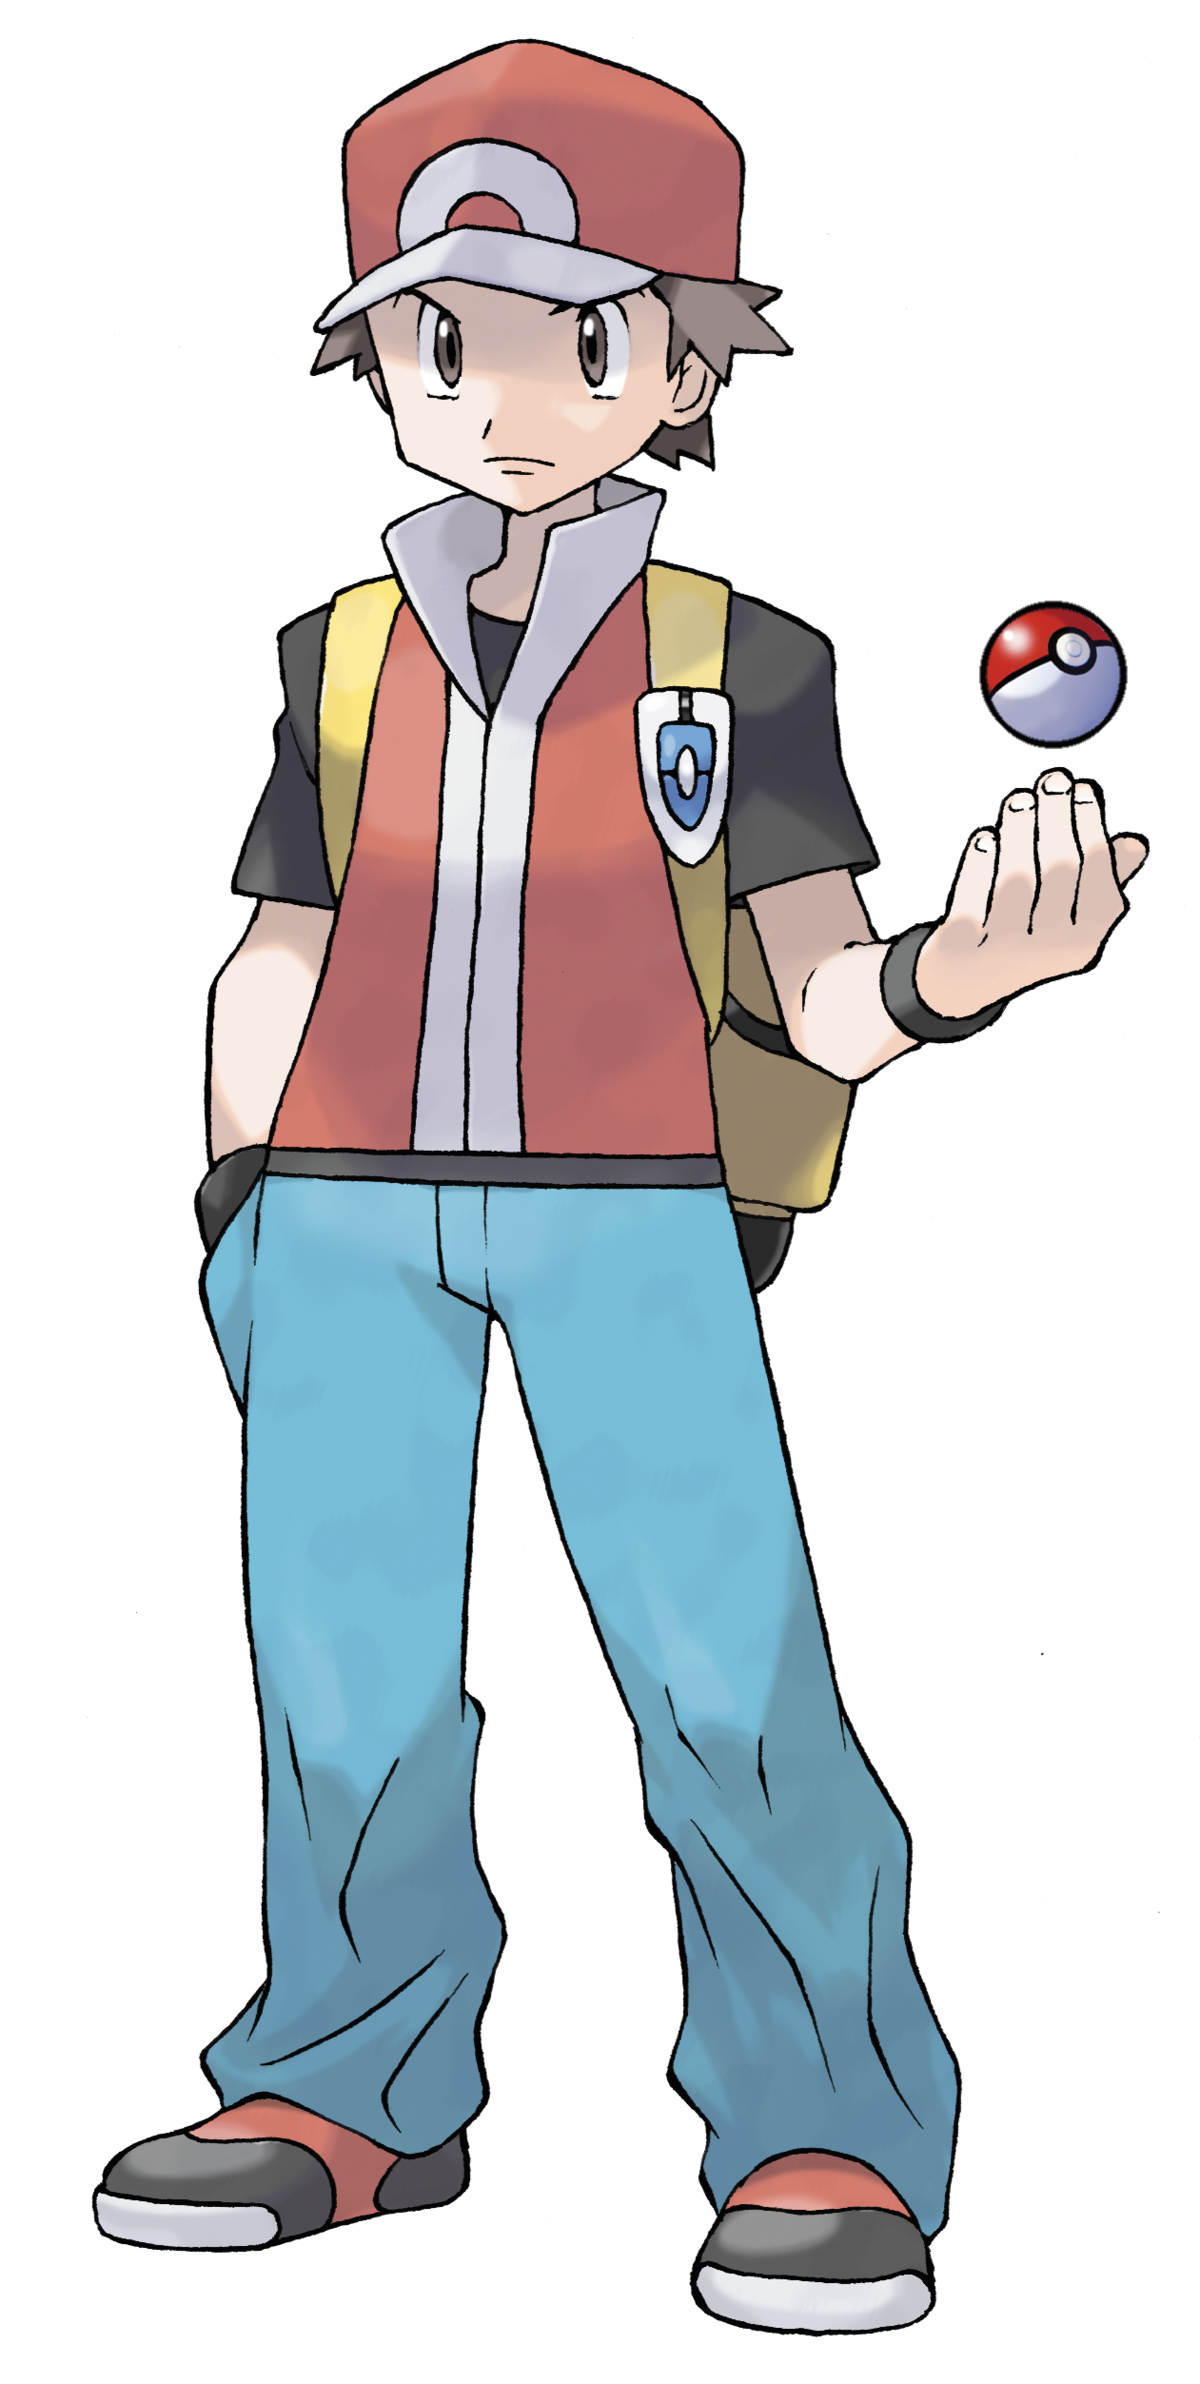 Pokémon: Ash Vs. Red - Who Is The Better Trainer?